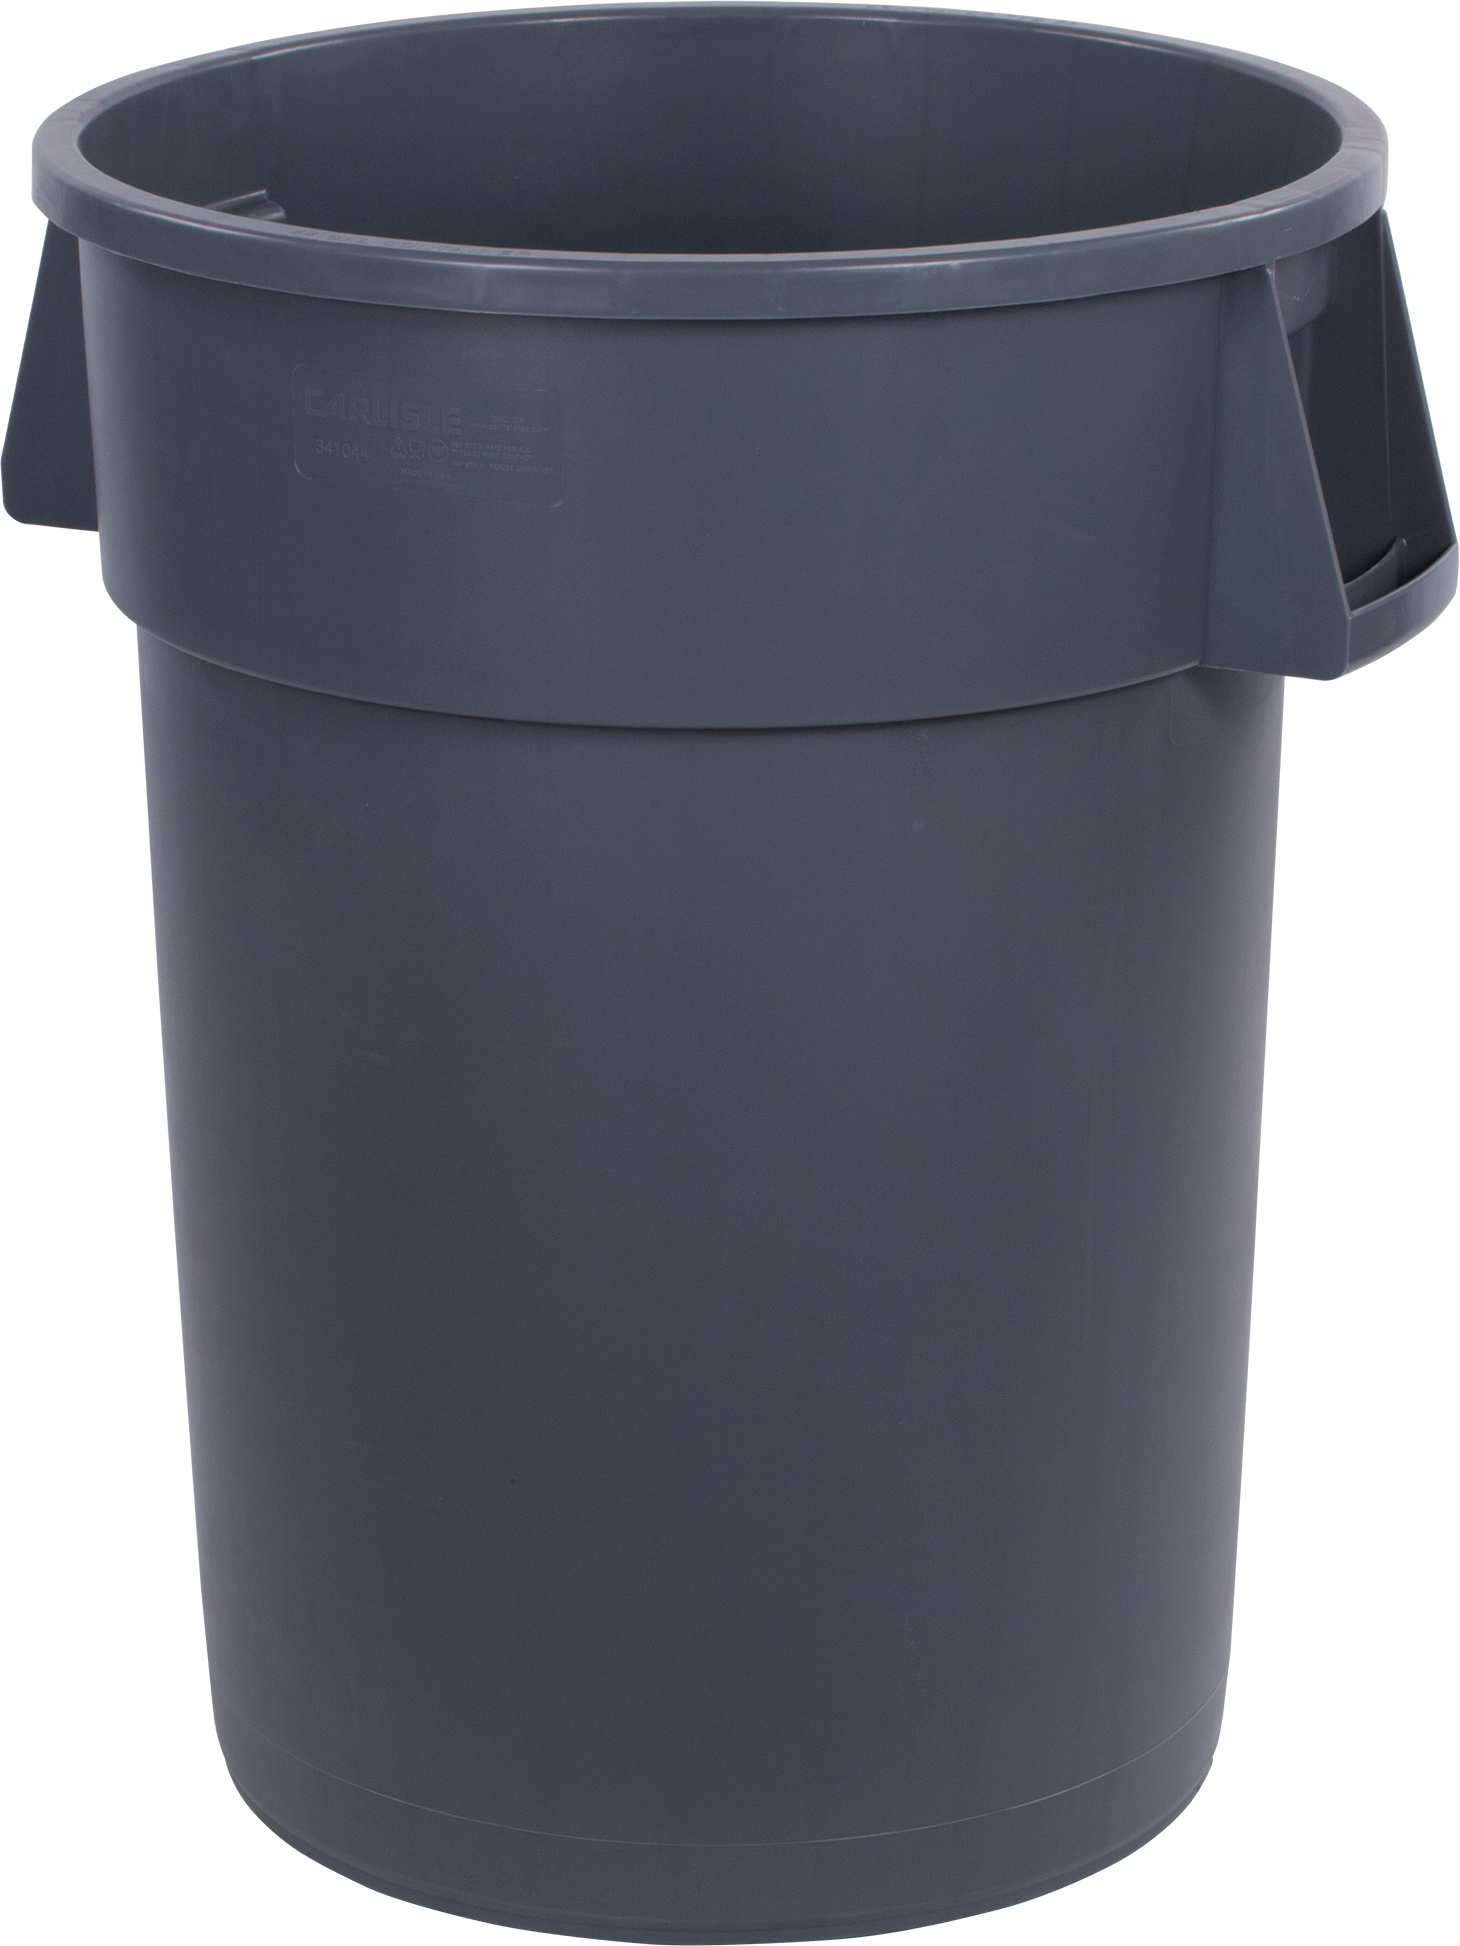 32GAL GRY CONTAINER 4CS BRUTE TRASH ROUND WASTE BIN RECEP